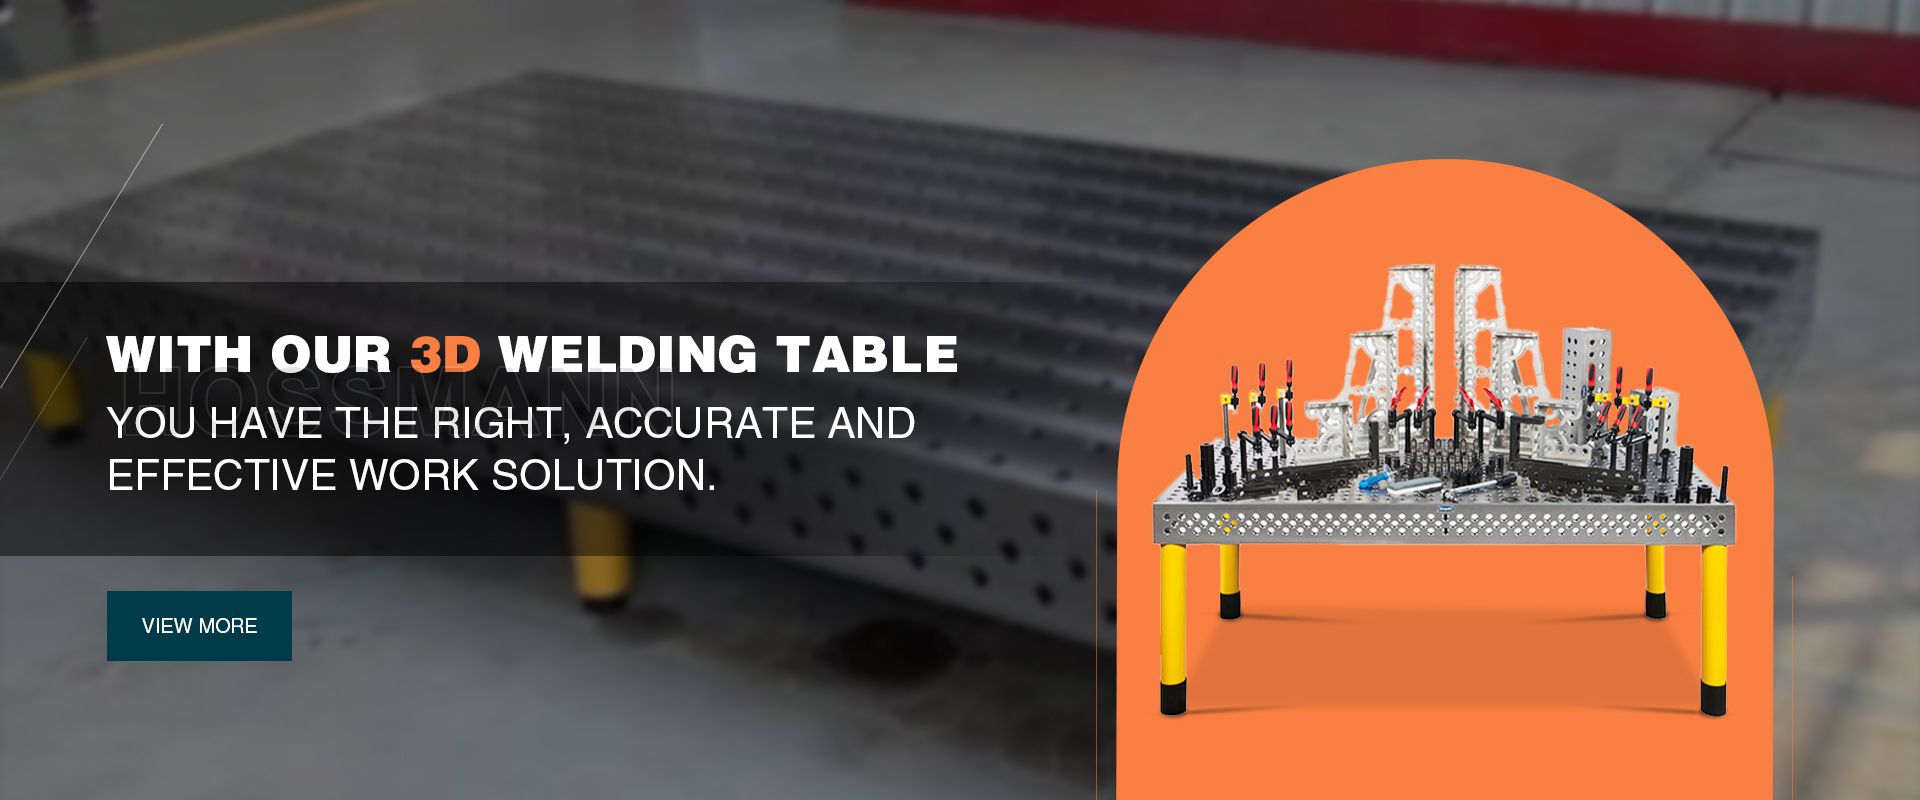 3D Welding Table With Angle Iron